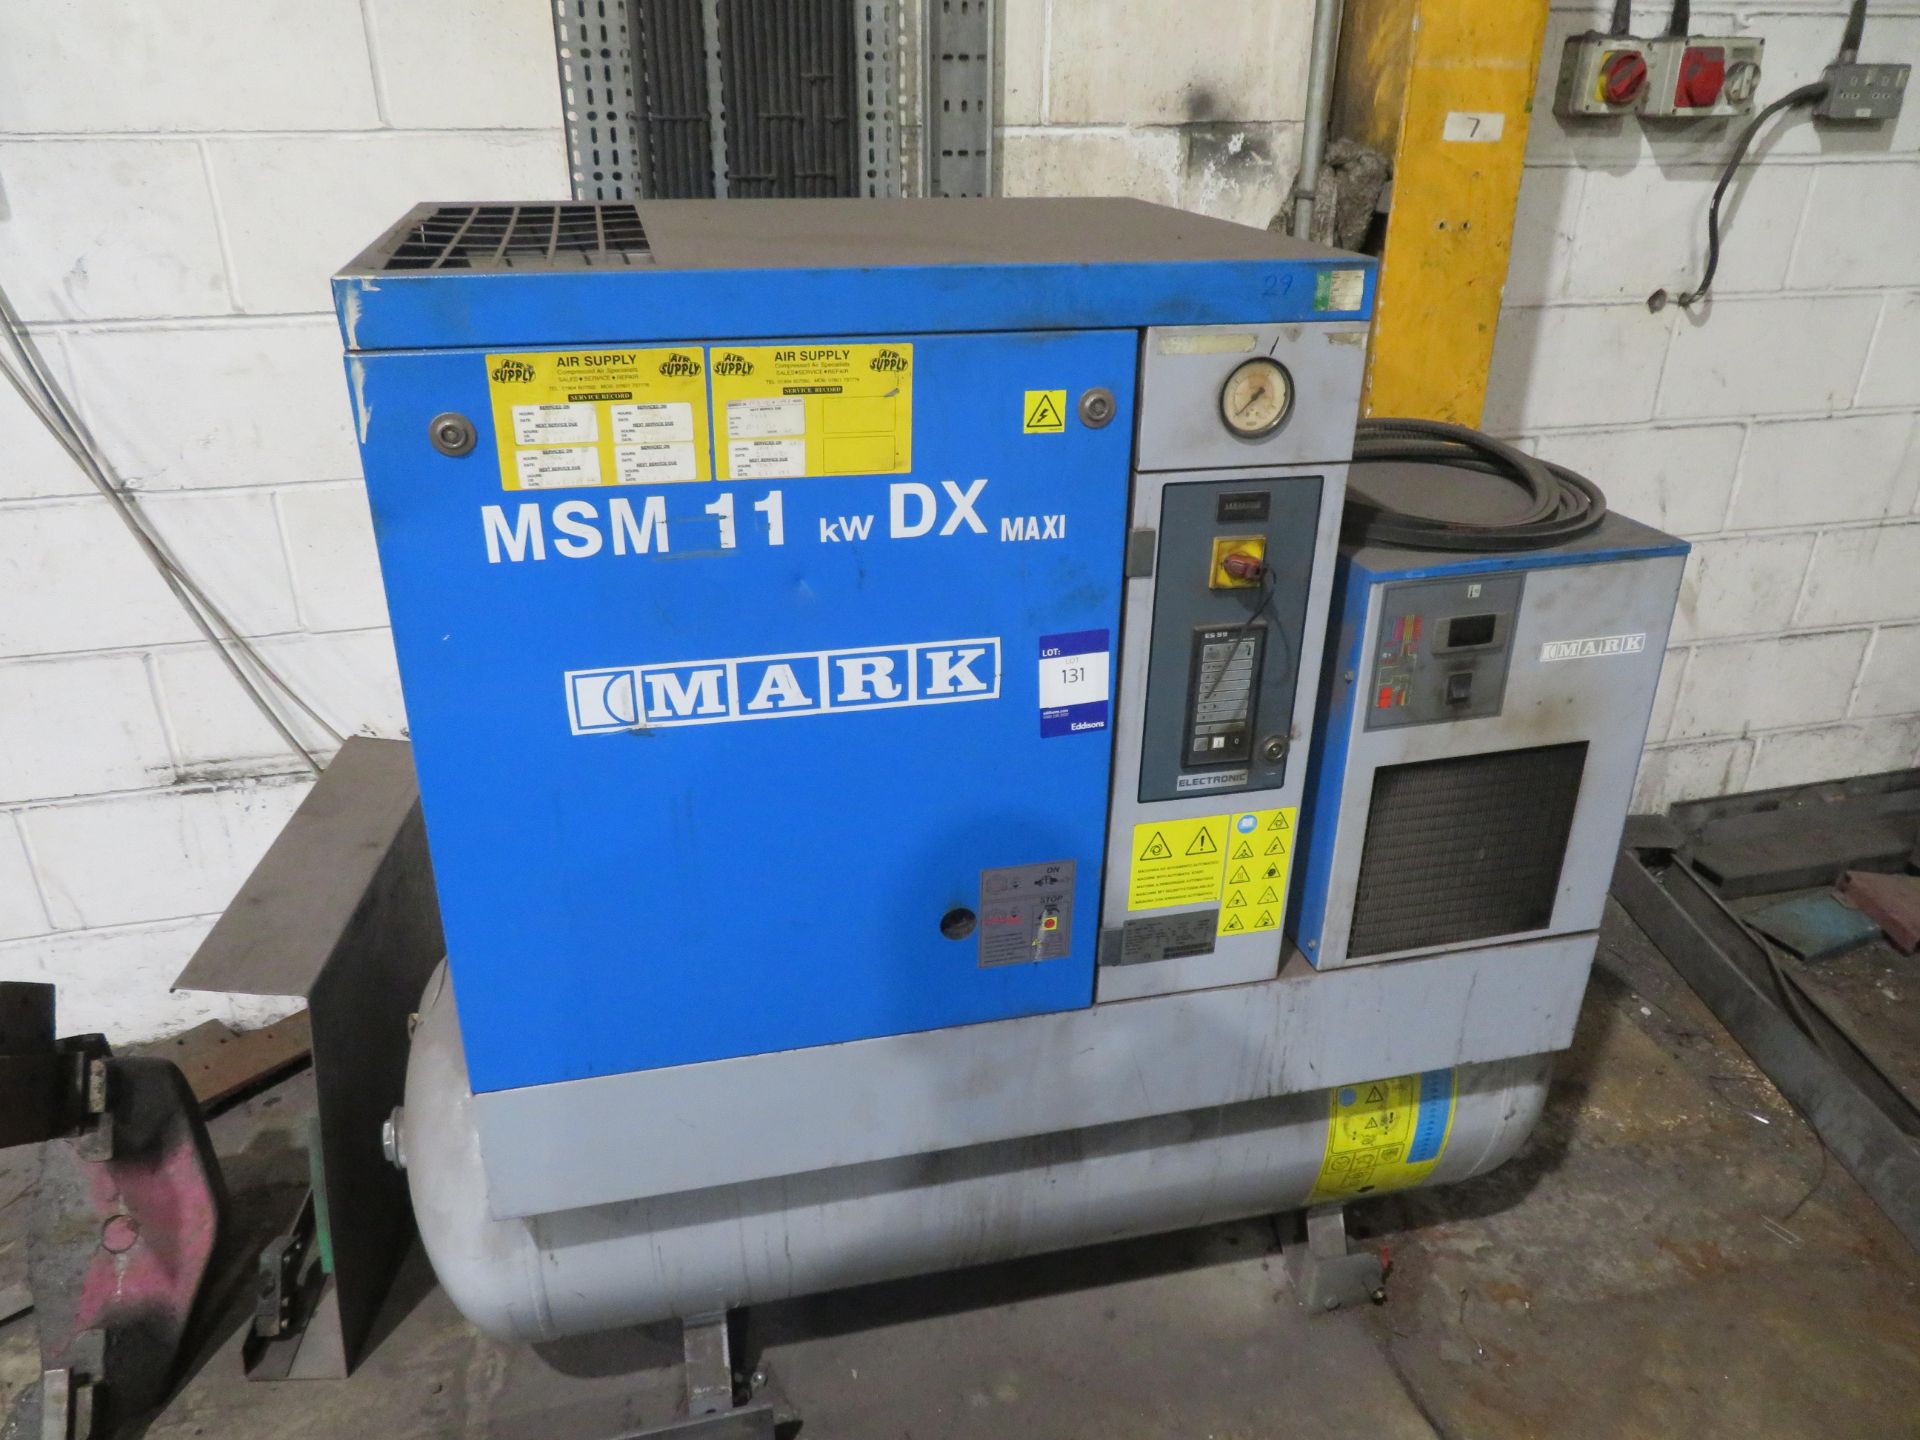 Mark 11kW DX Maxi compressor and air dryer